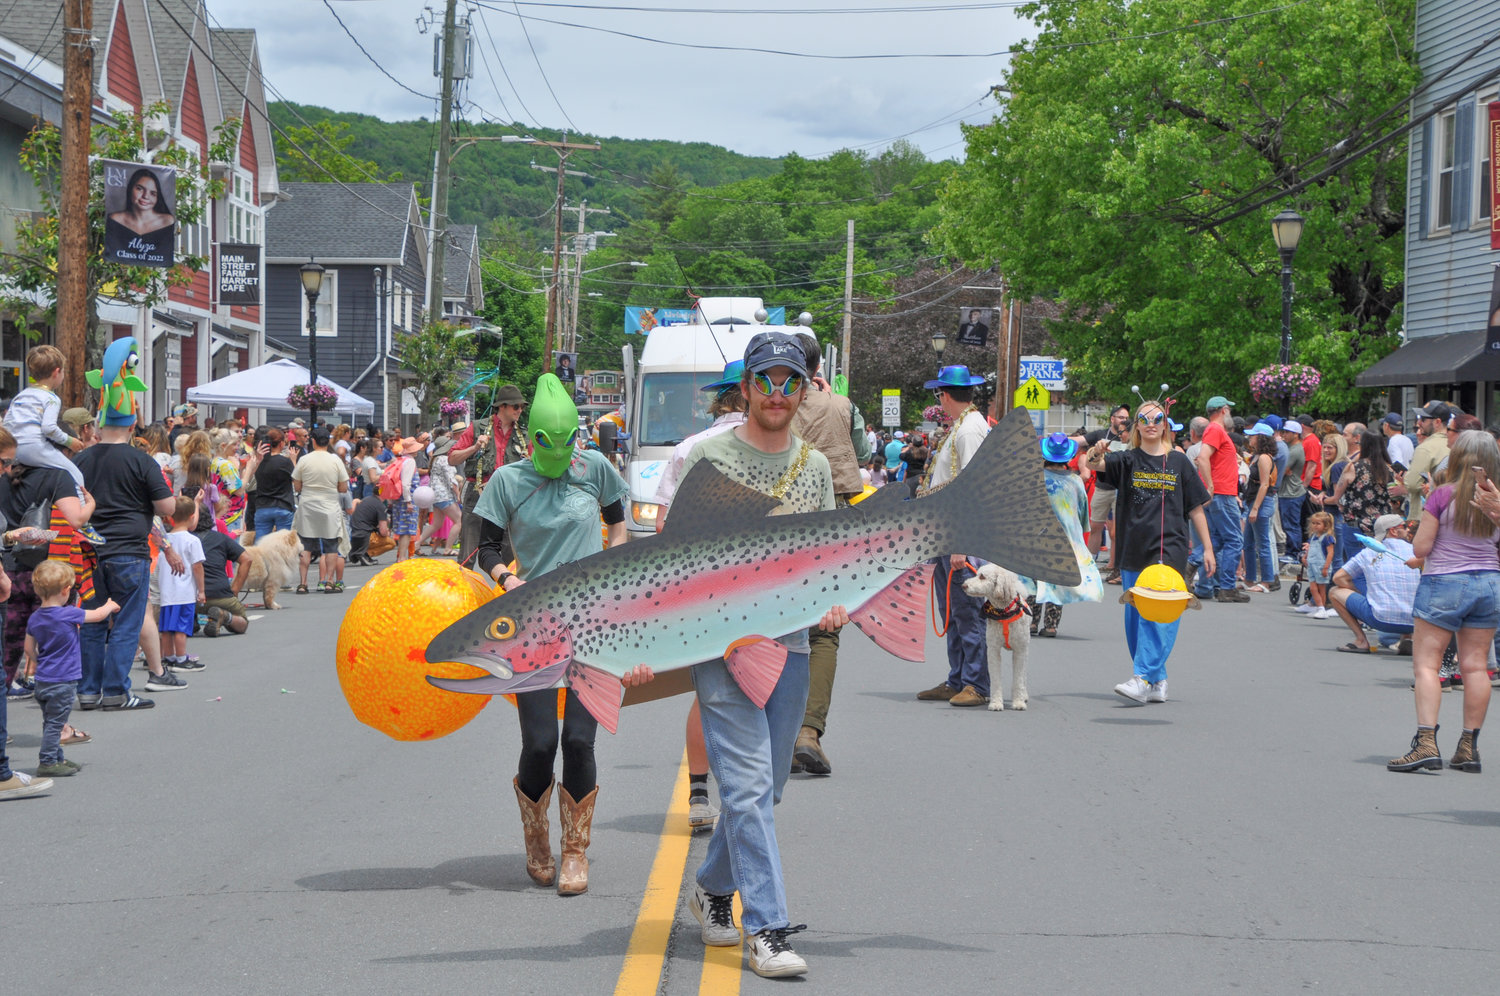 Located in the southwest corner of the Catskill Park, Livingston Manor boasts world-class fishing streams, hiking, hunting, waterfalls, lakes and ponds. And a parade saluting all things trout.